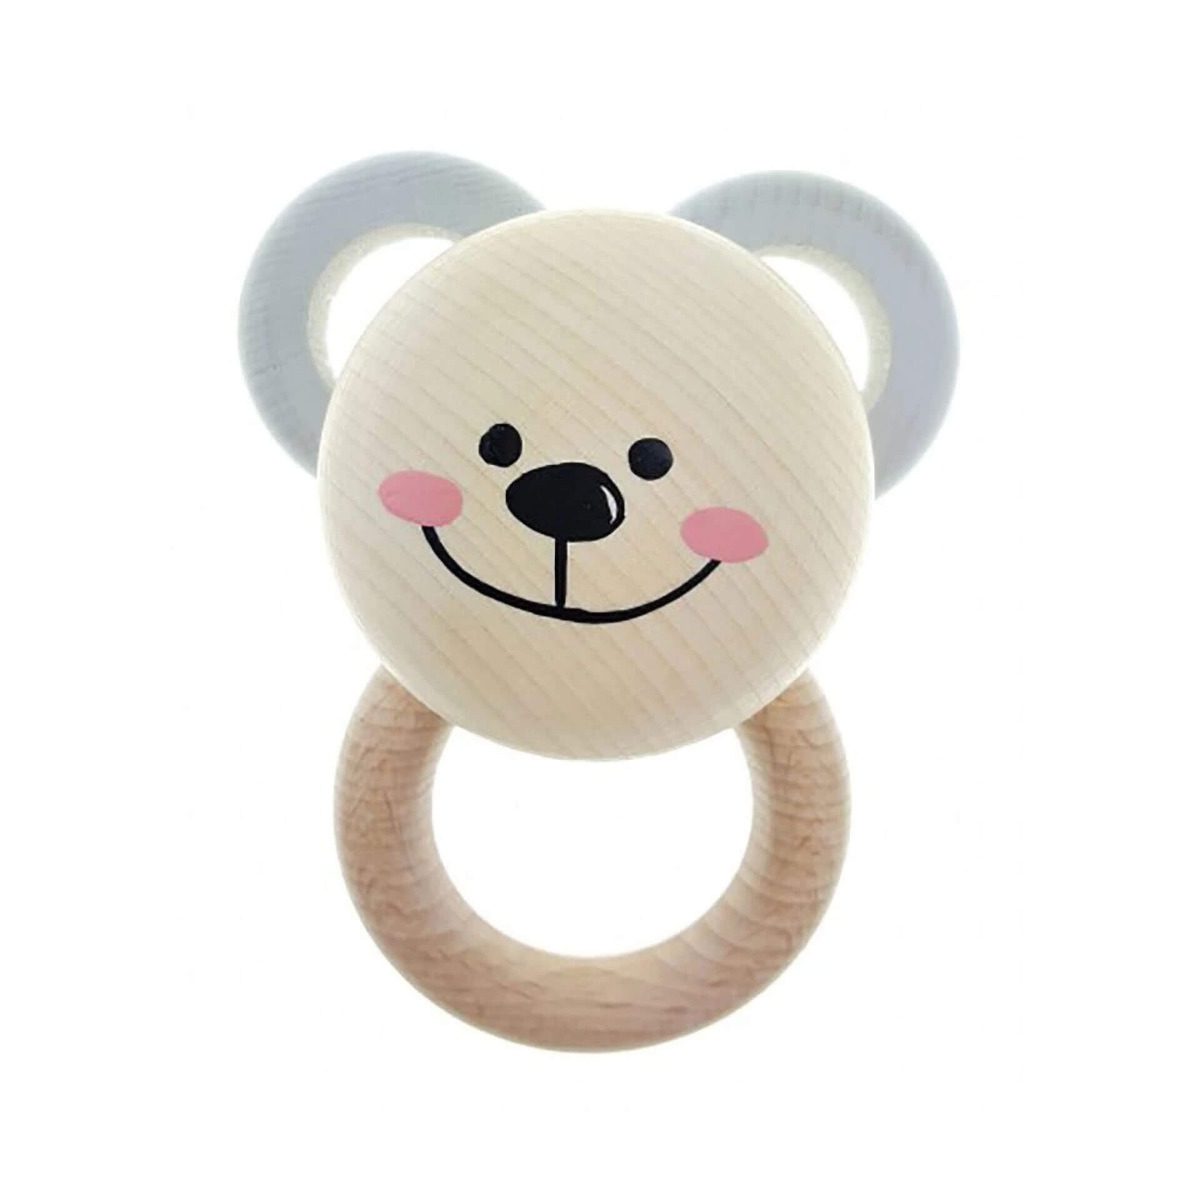 Wooden Bear Teether - Natural Pink - Hess-Spielzeug